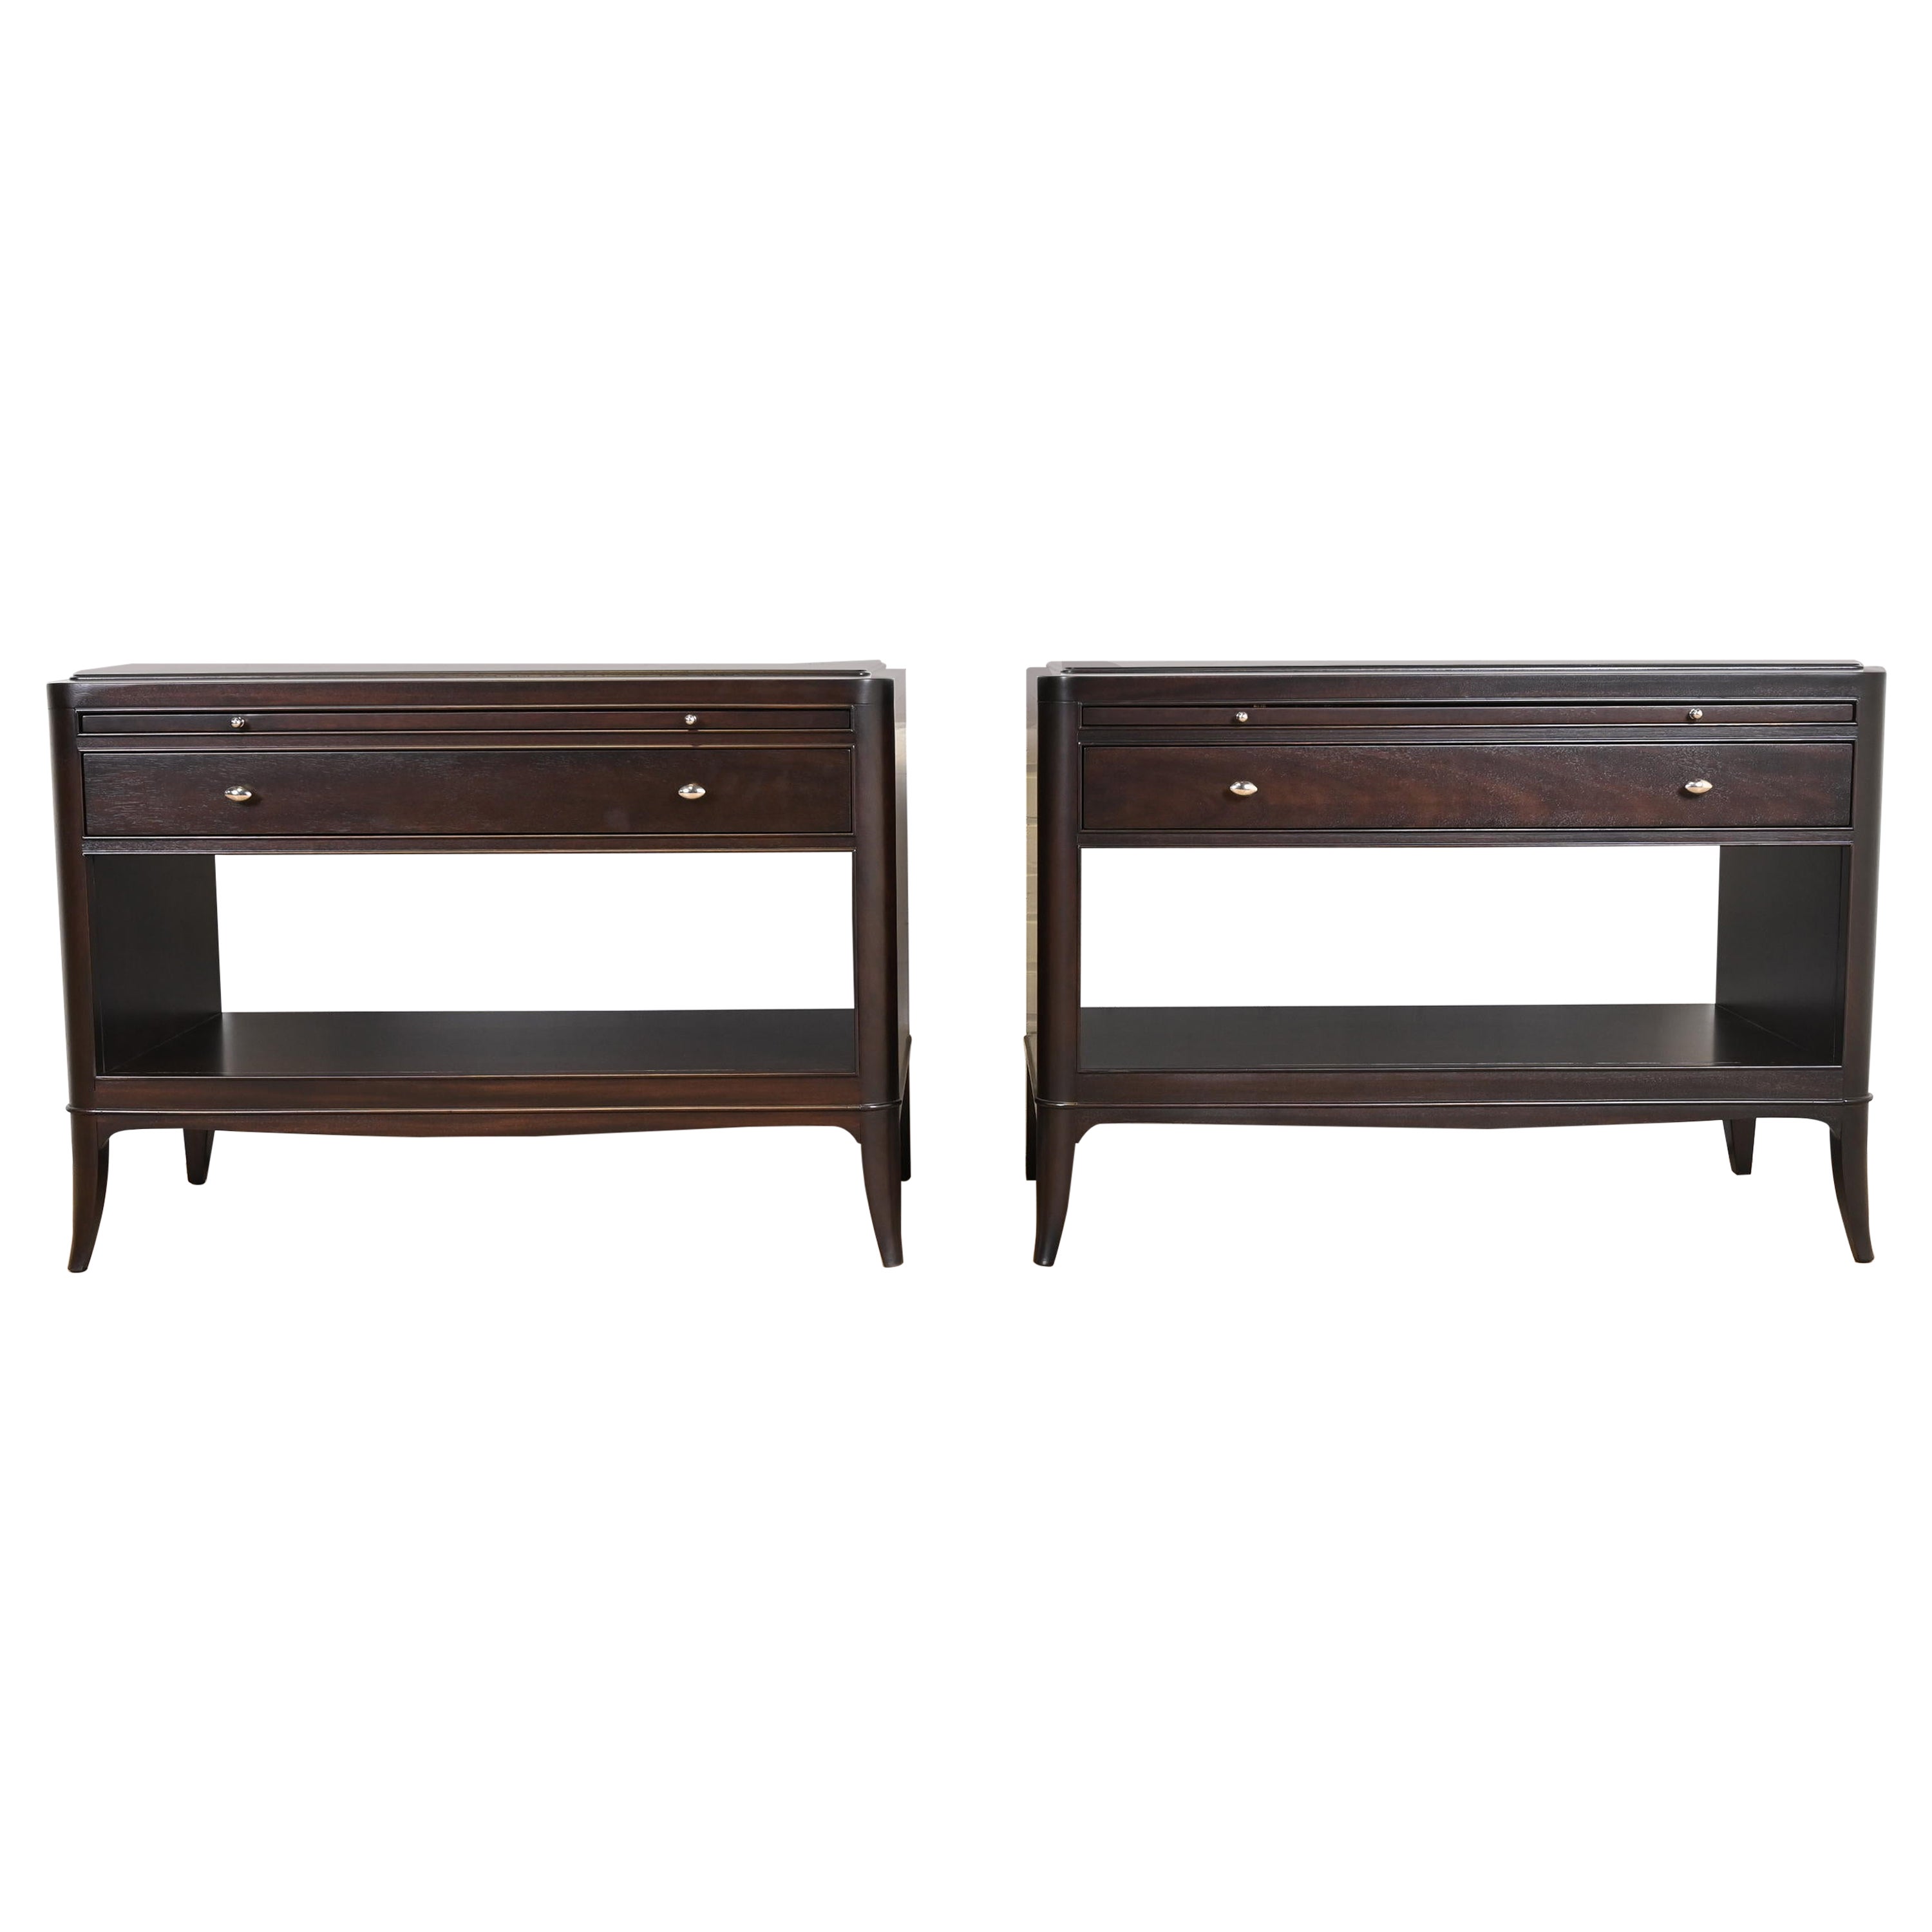 Barbara Barry for Baker Furniture Mahogany Oversized Nightstands, Refinished